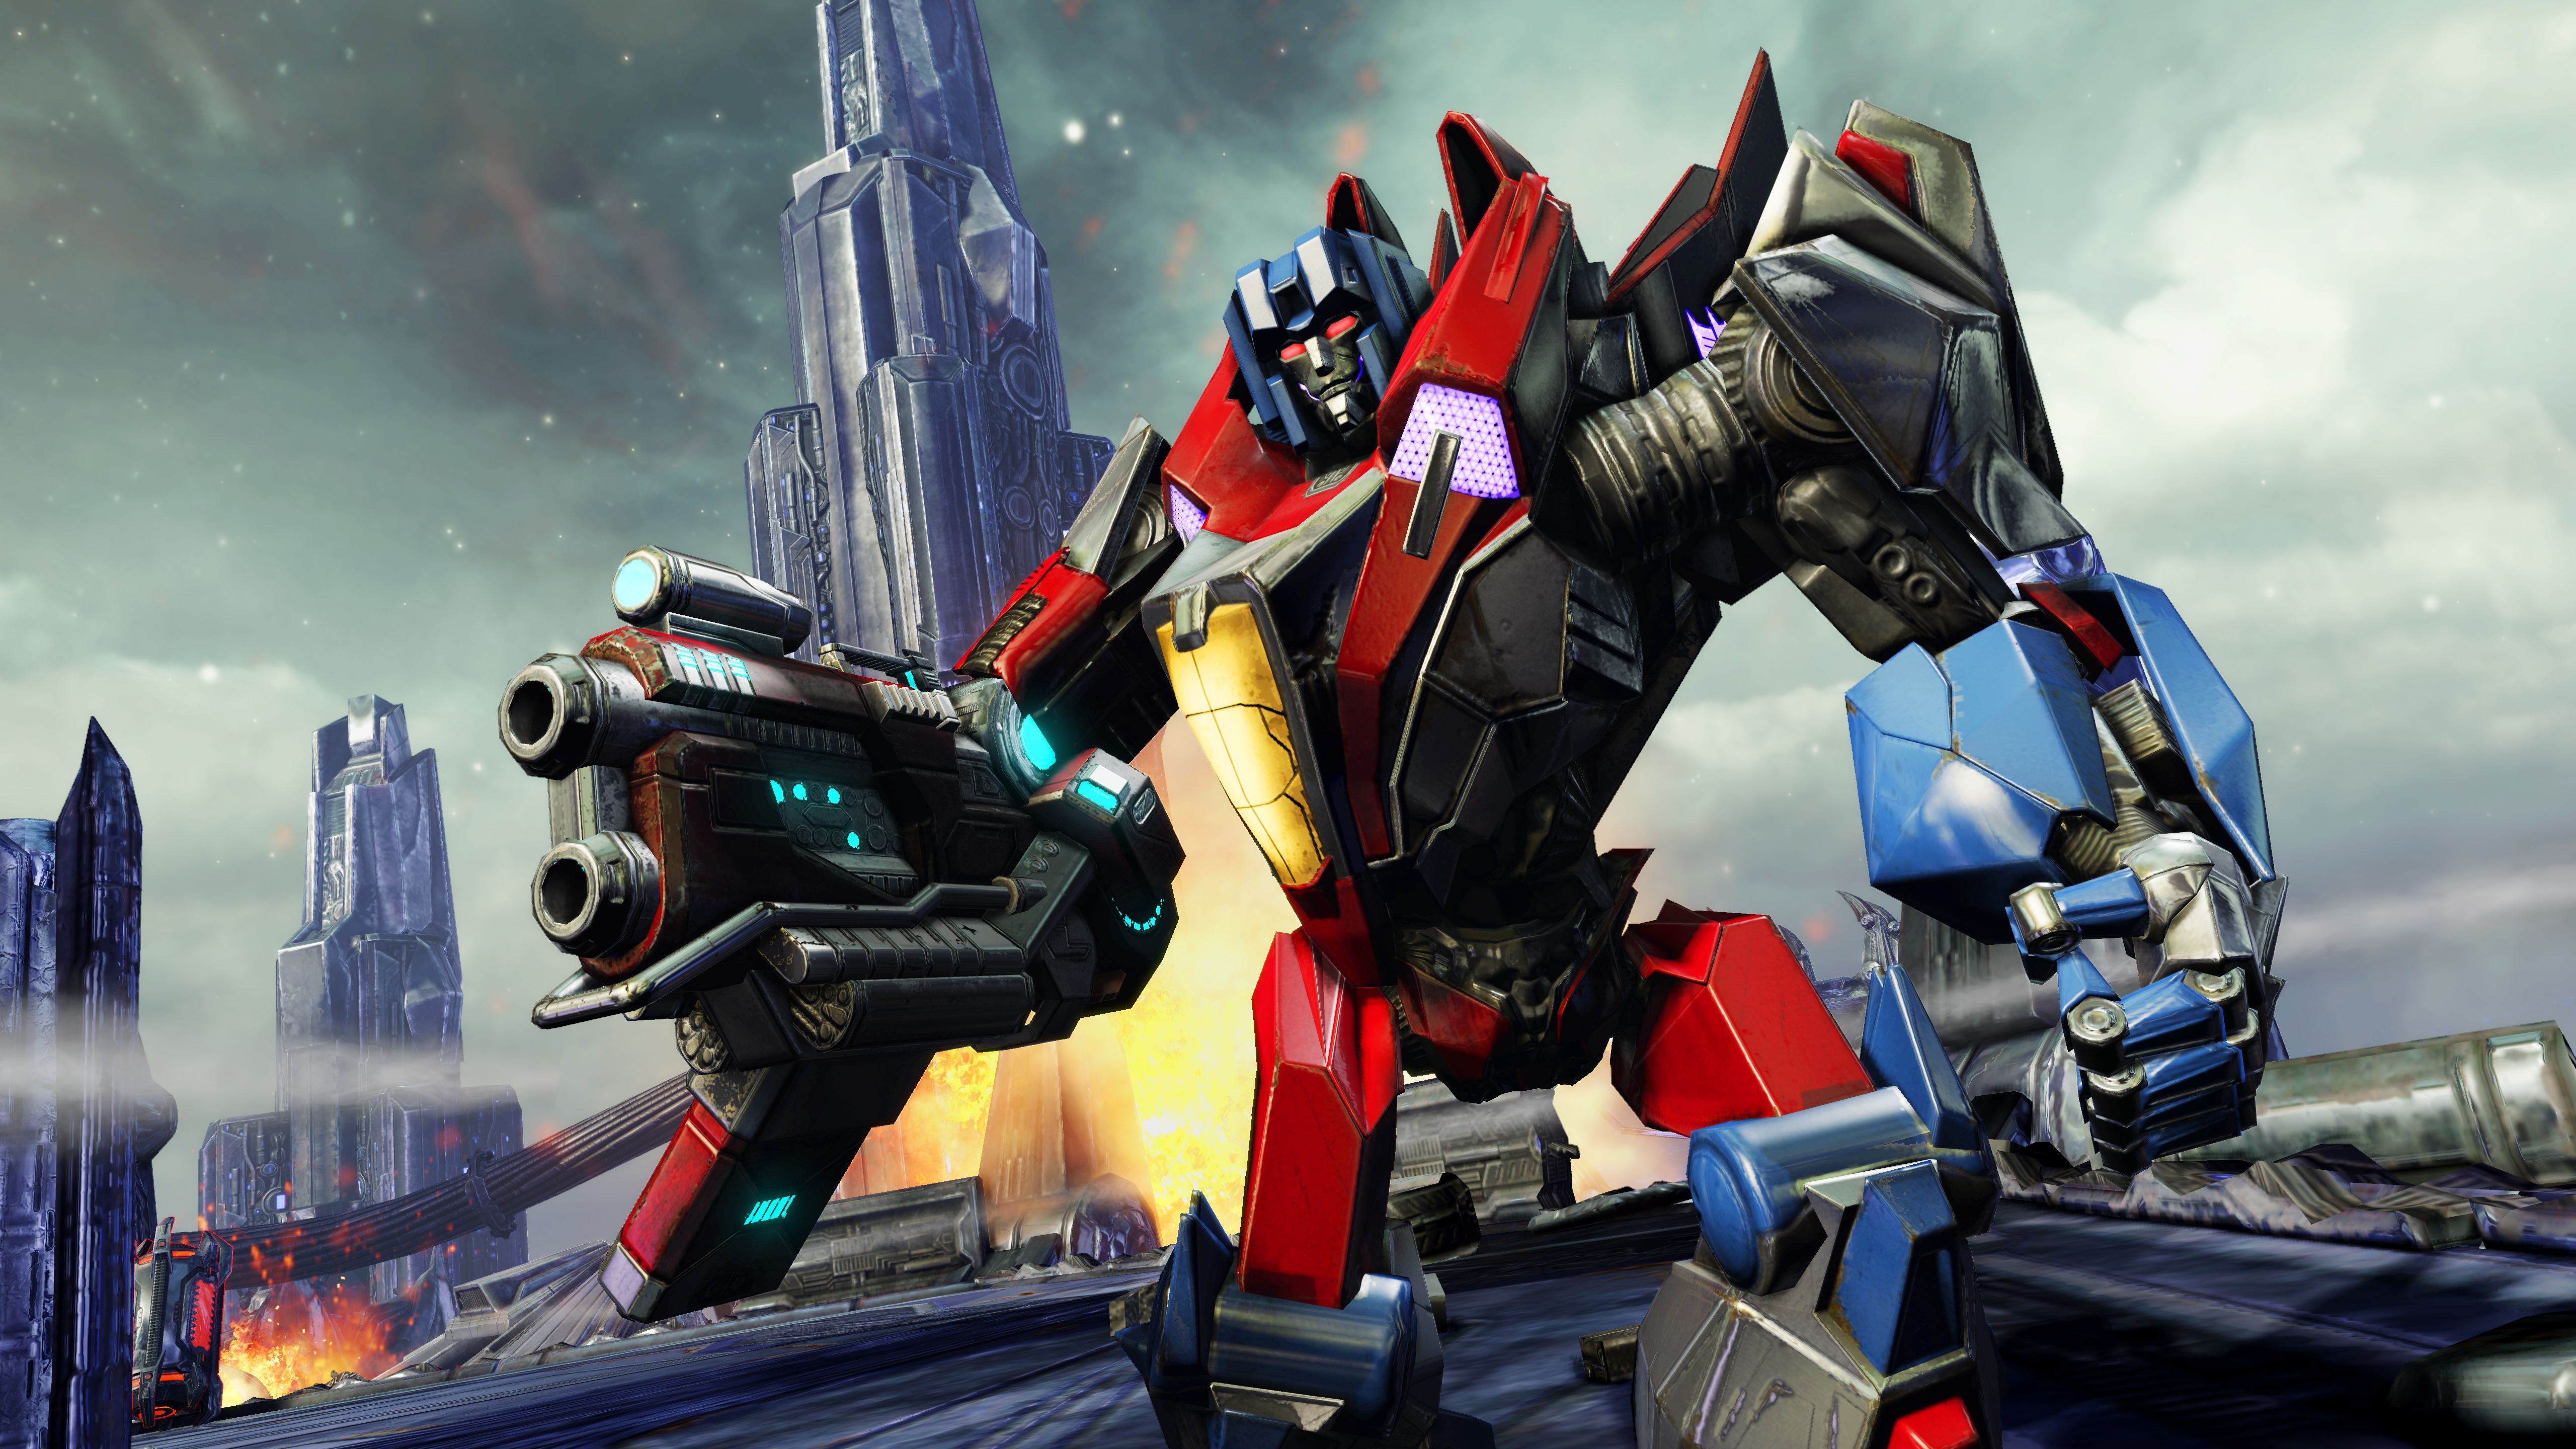 Transformers: Fall Of Cybertron Backgrounds, Compatible - PC, Mobile, Gadgets| 5120x2880 px